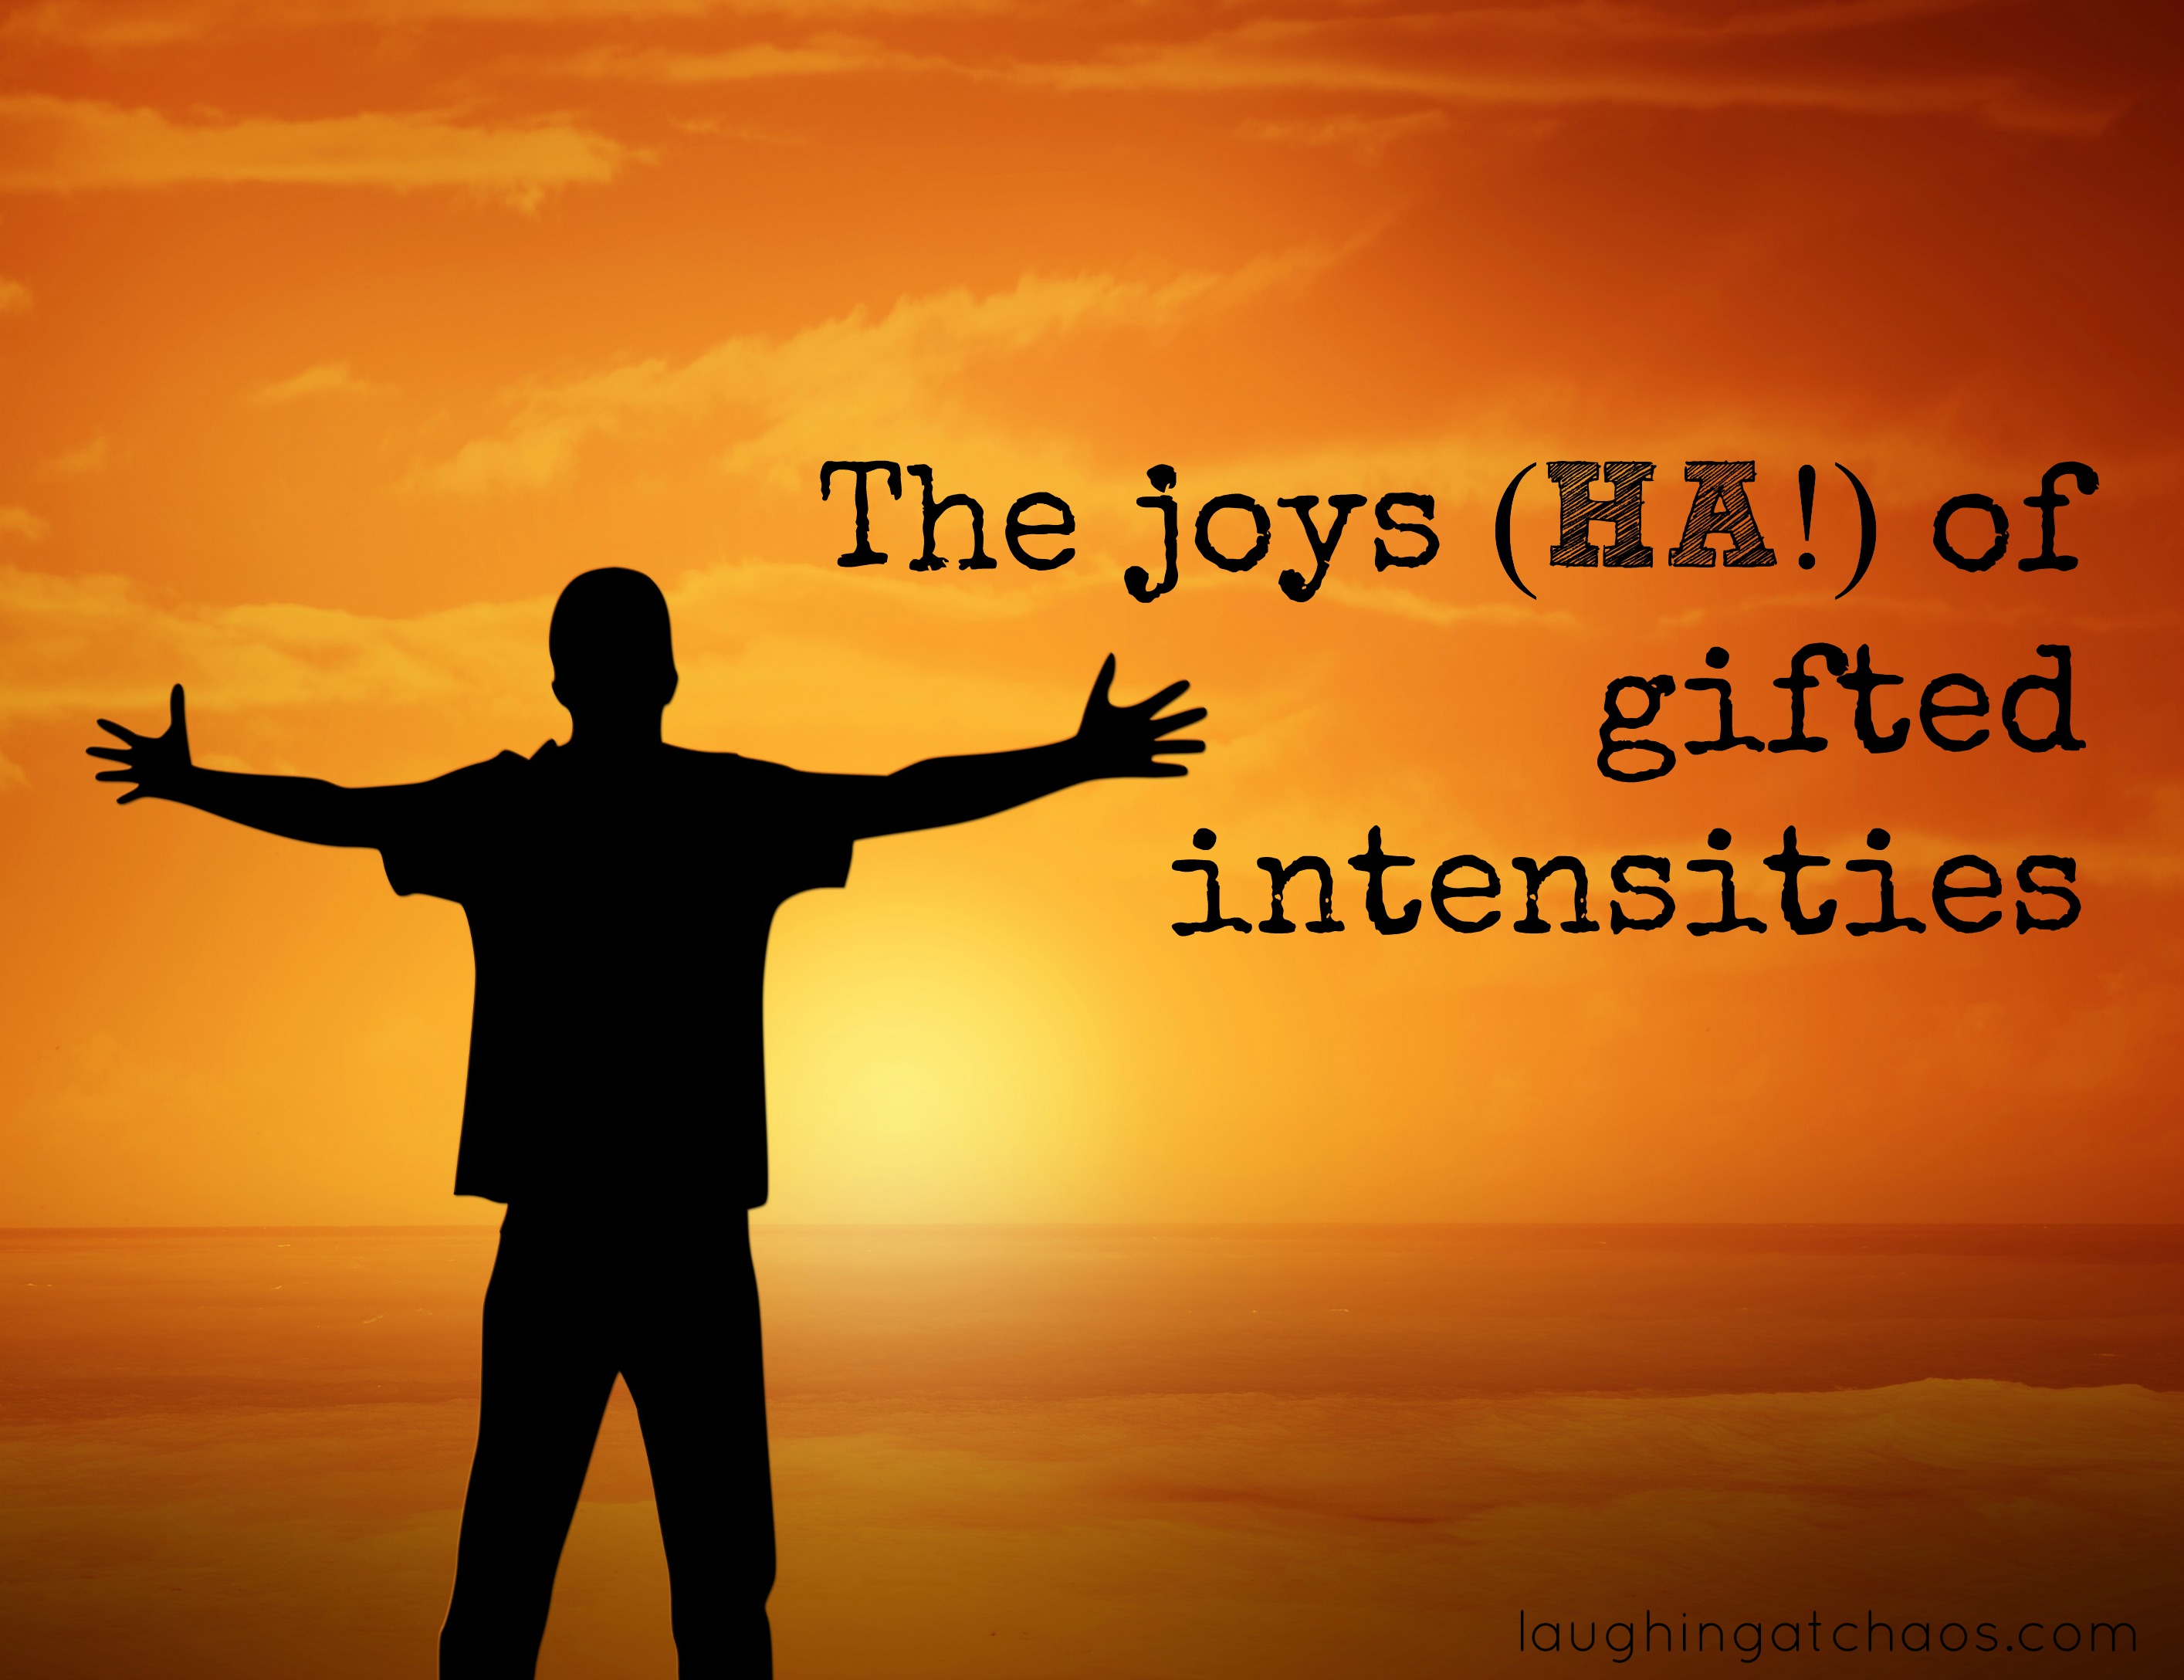 The joys (HA!) of gifted intensities